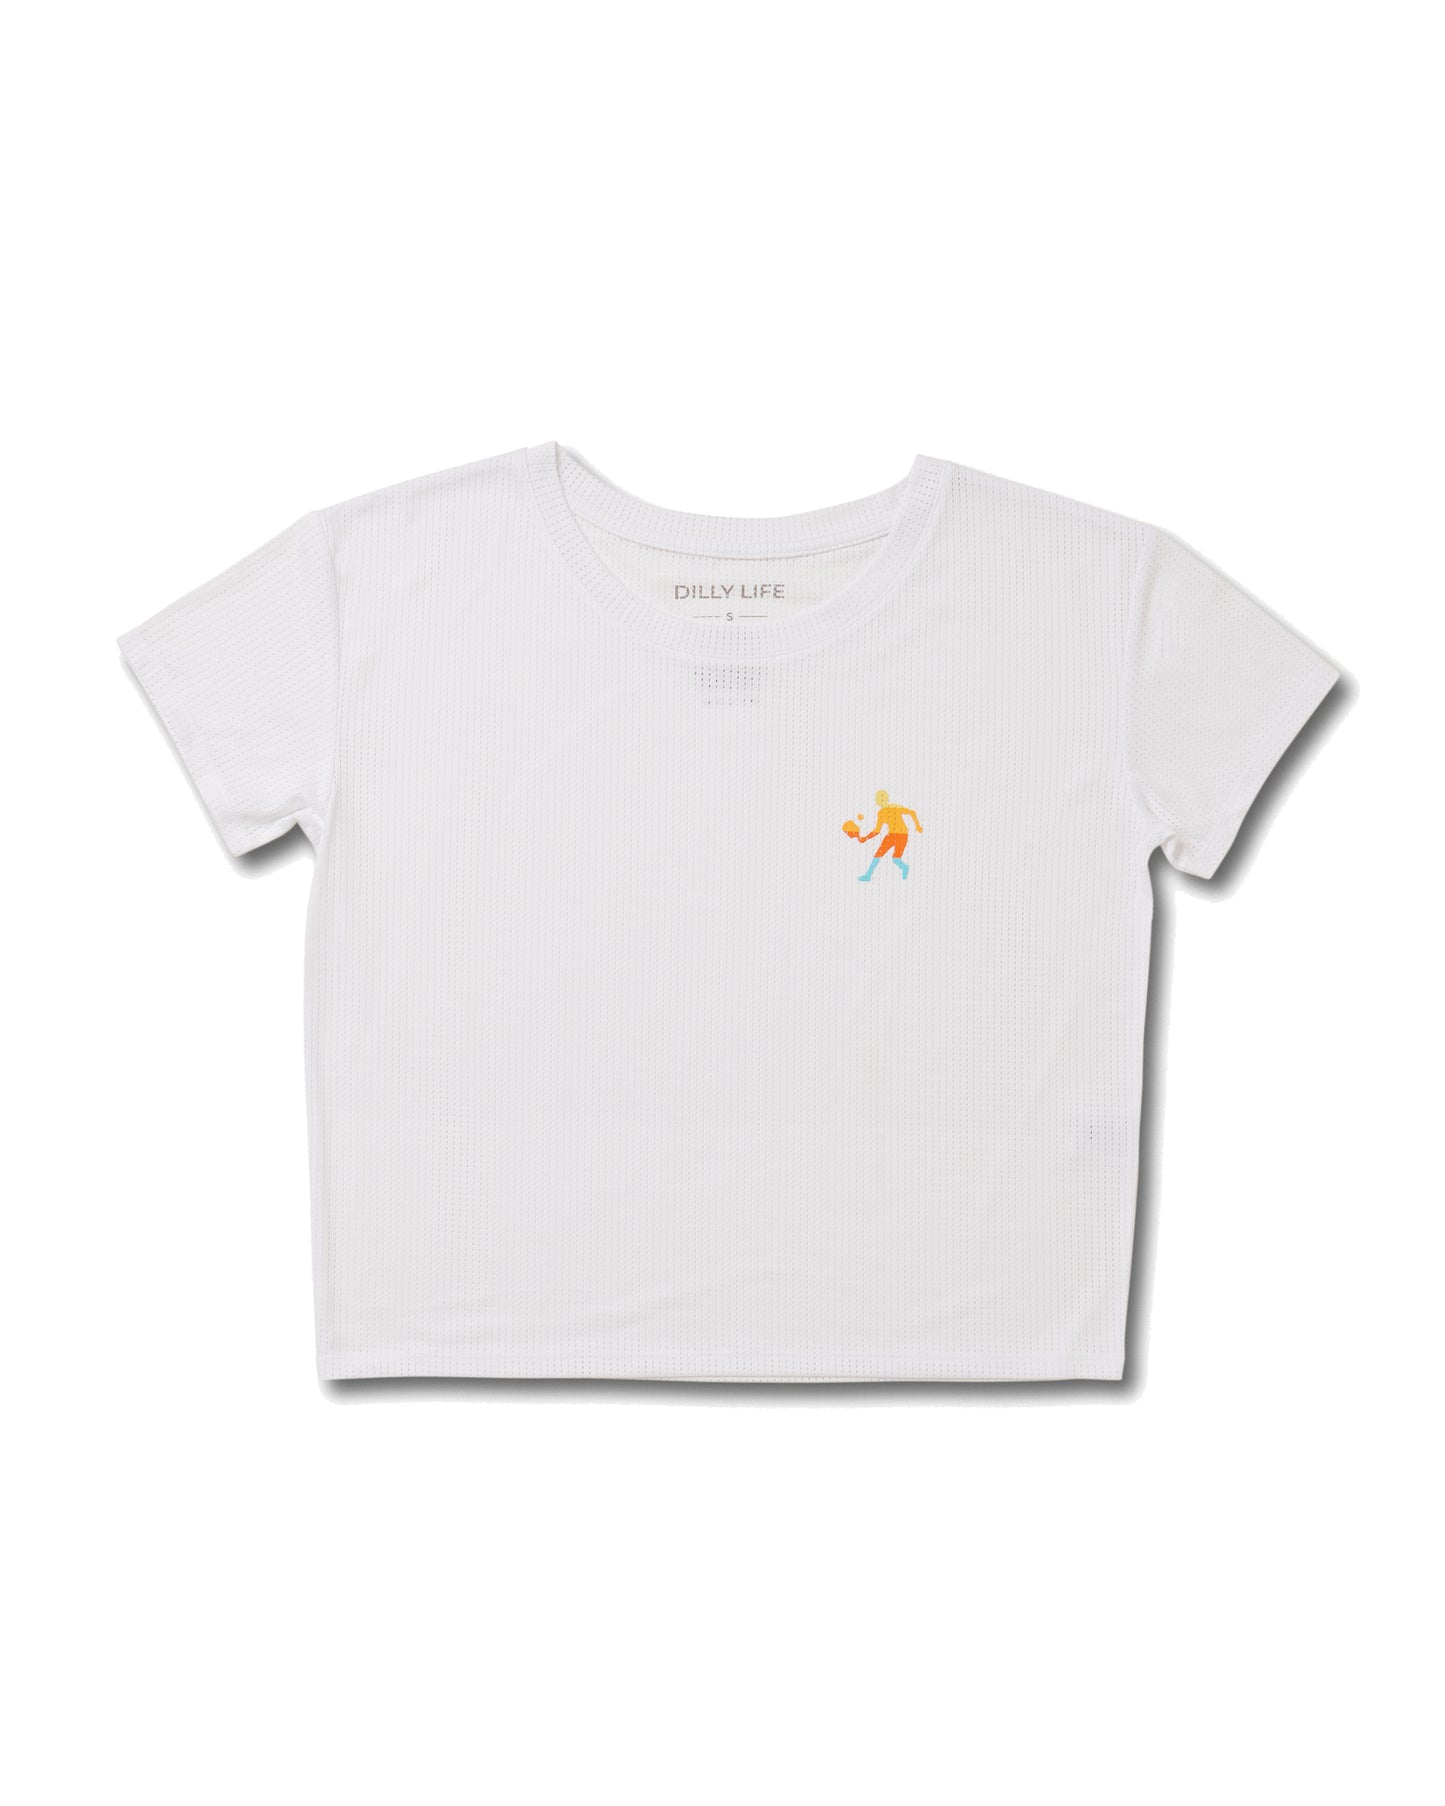 Breathable Court Tee